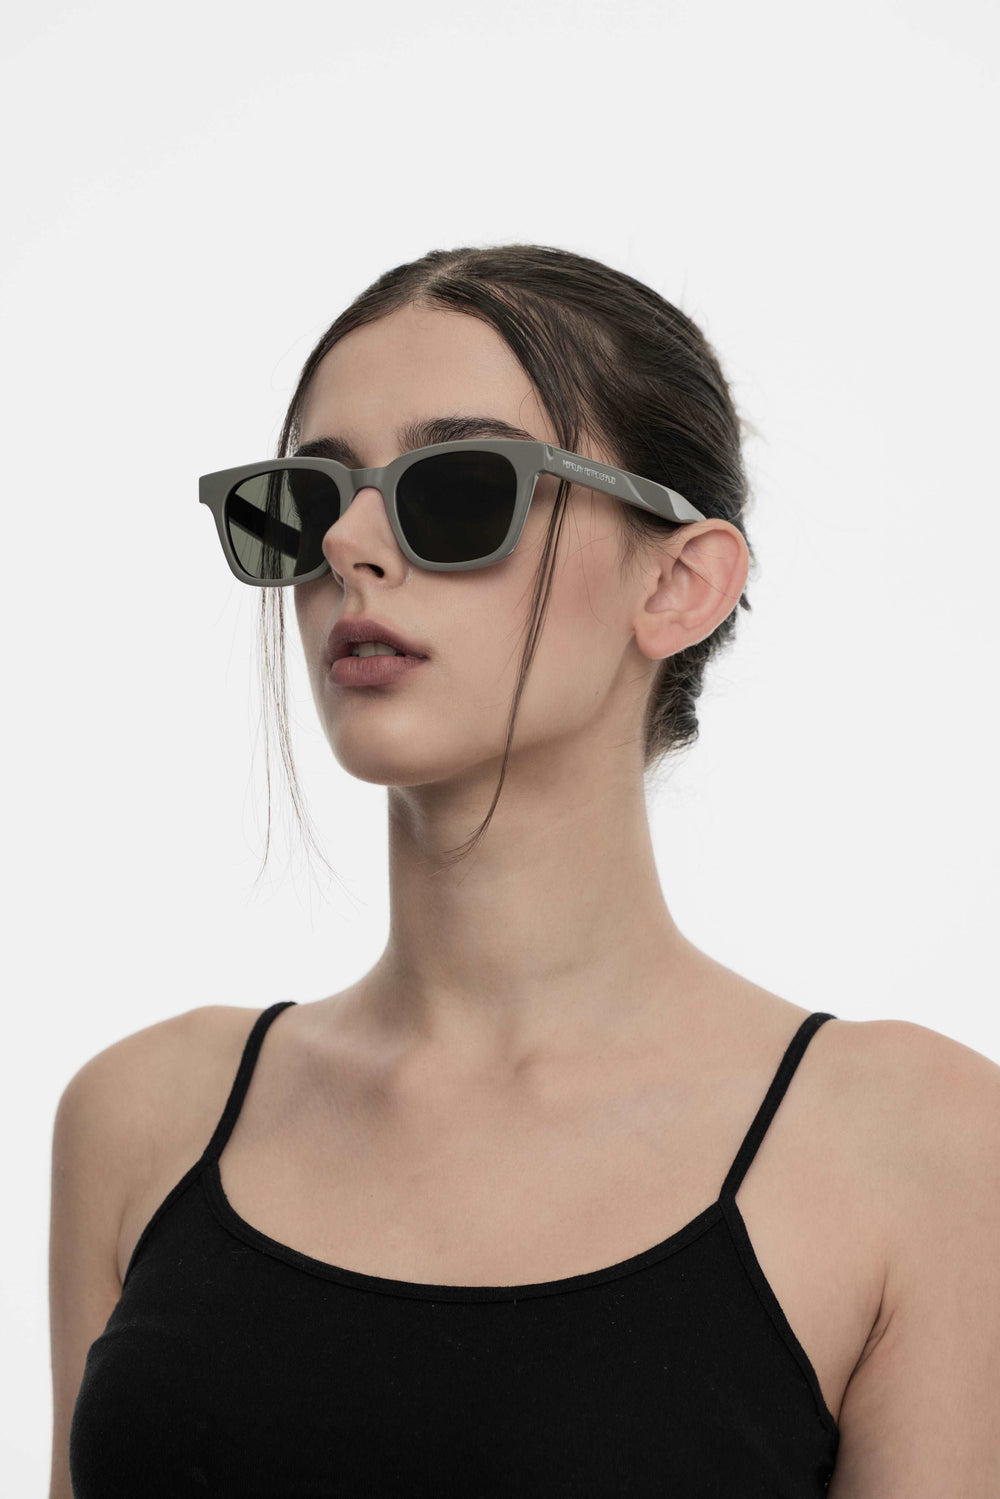 Model of her side face looking down wearing Bubblegum in grey Korean Fashion square Sunglasses from Mercury Retrograde Daydream Collection 